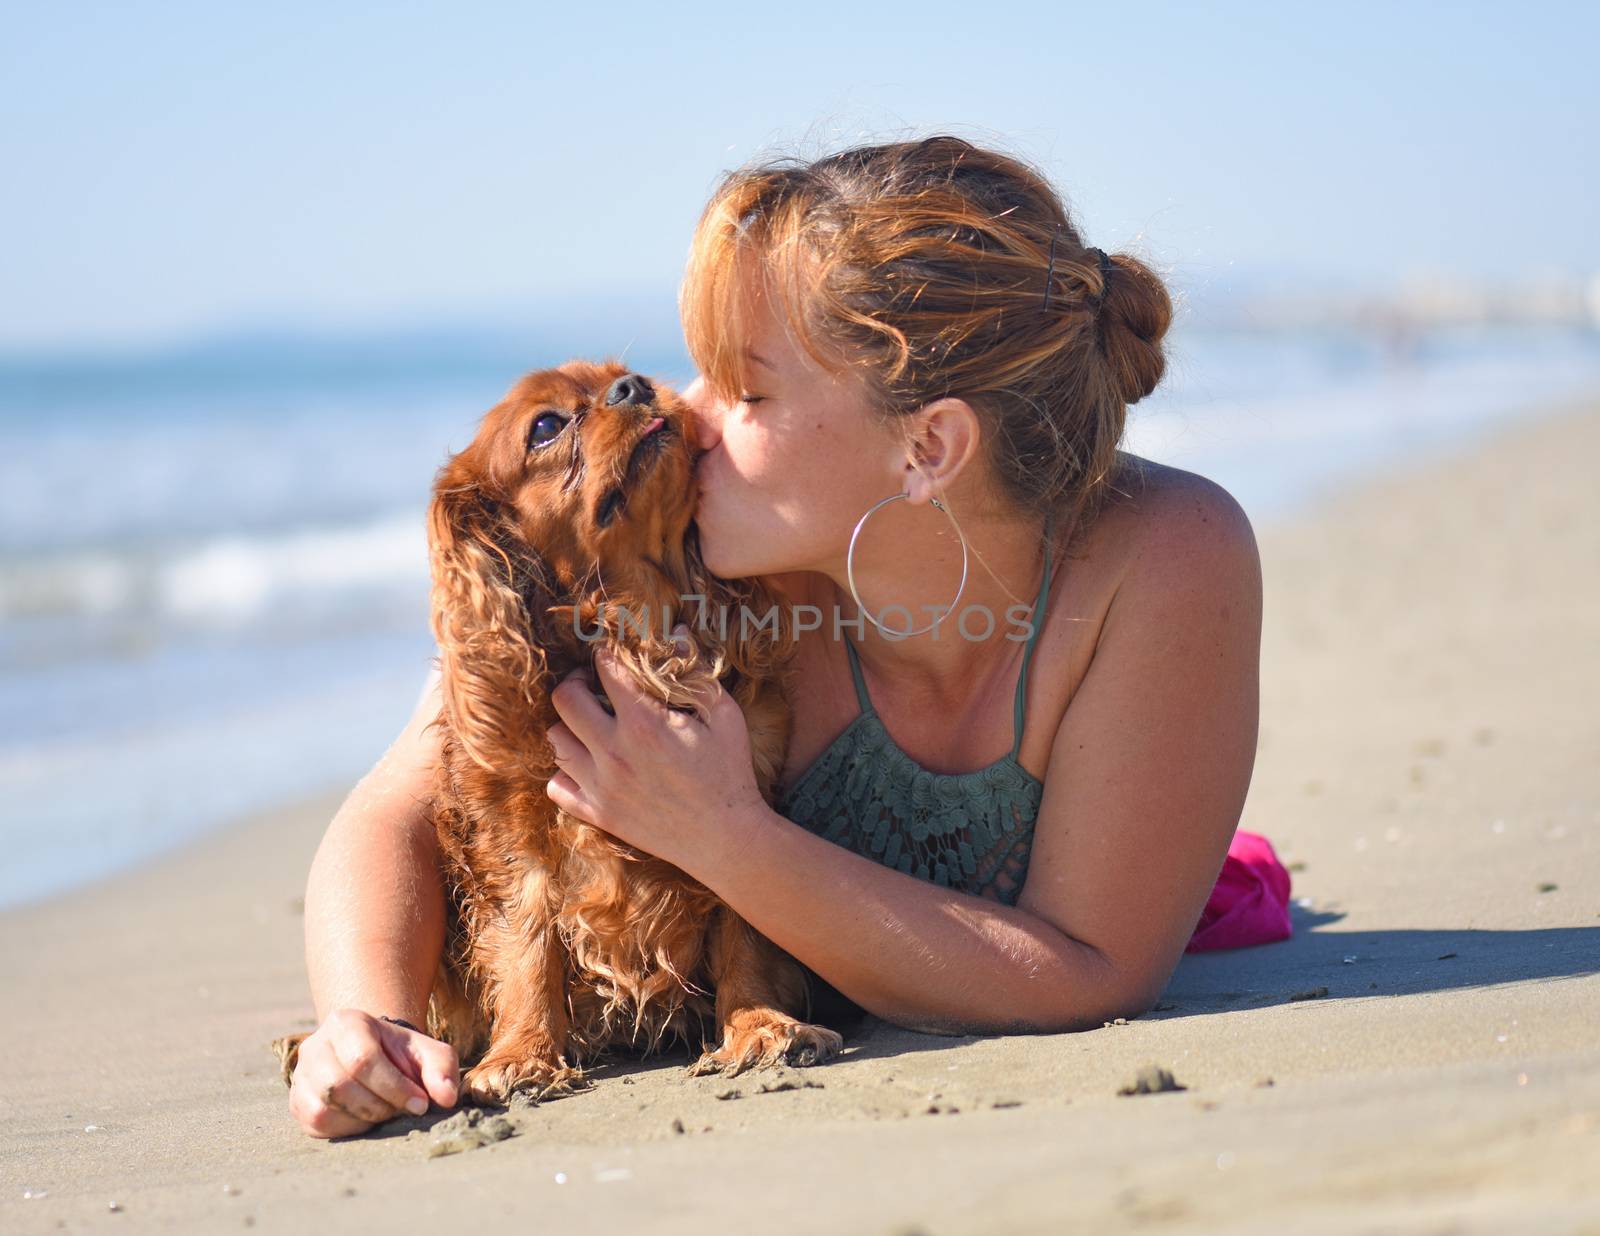 woman and dog on the beach by cynoclub